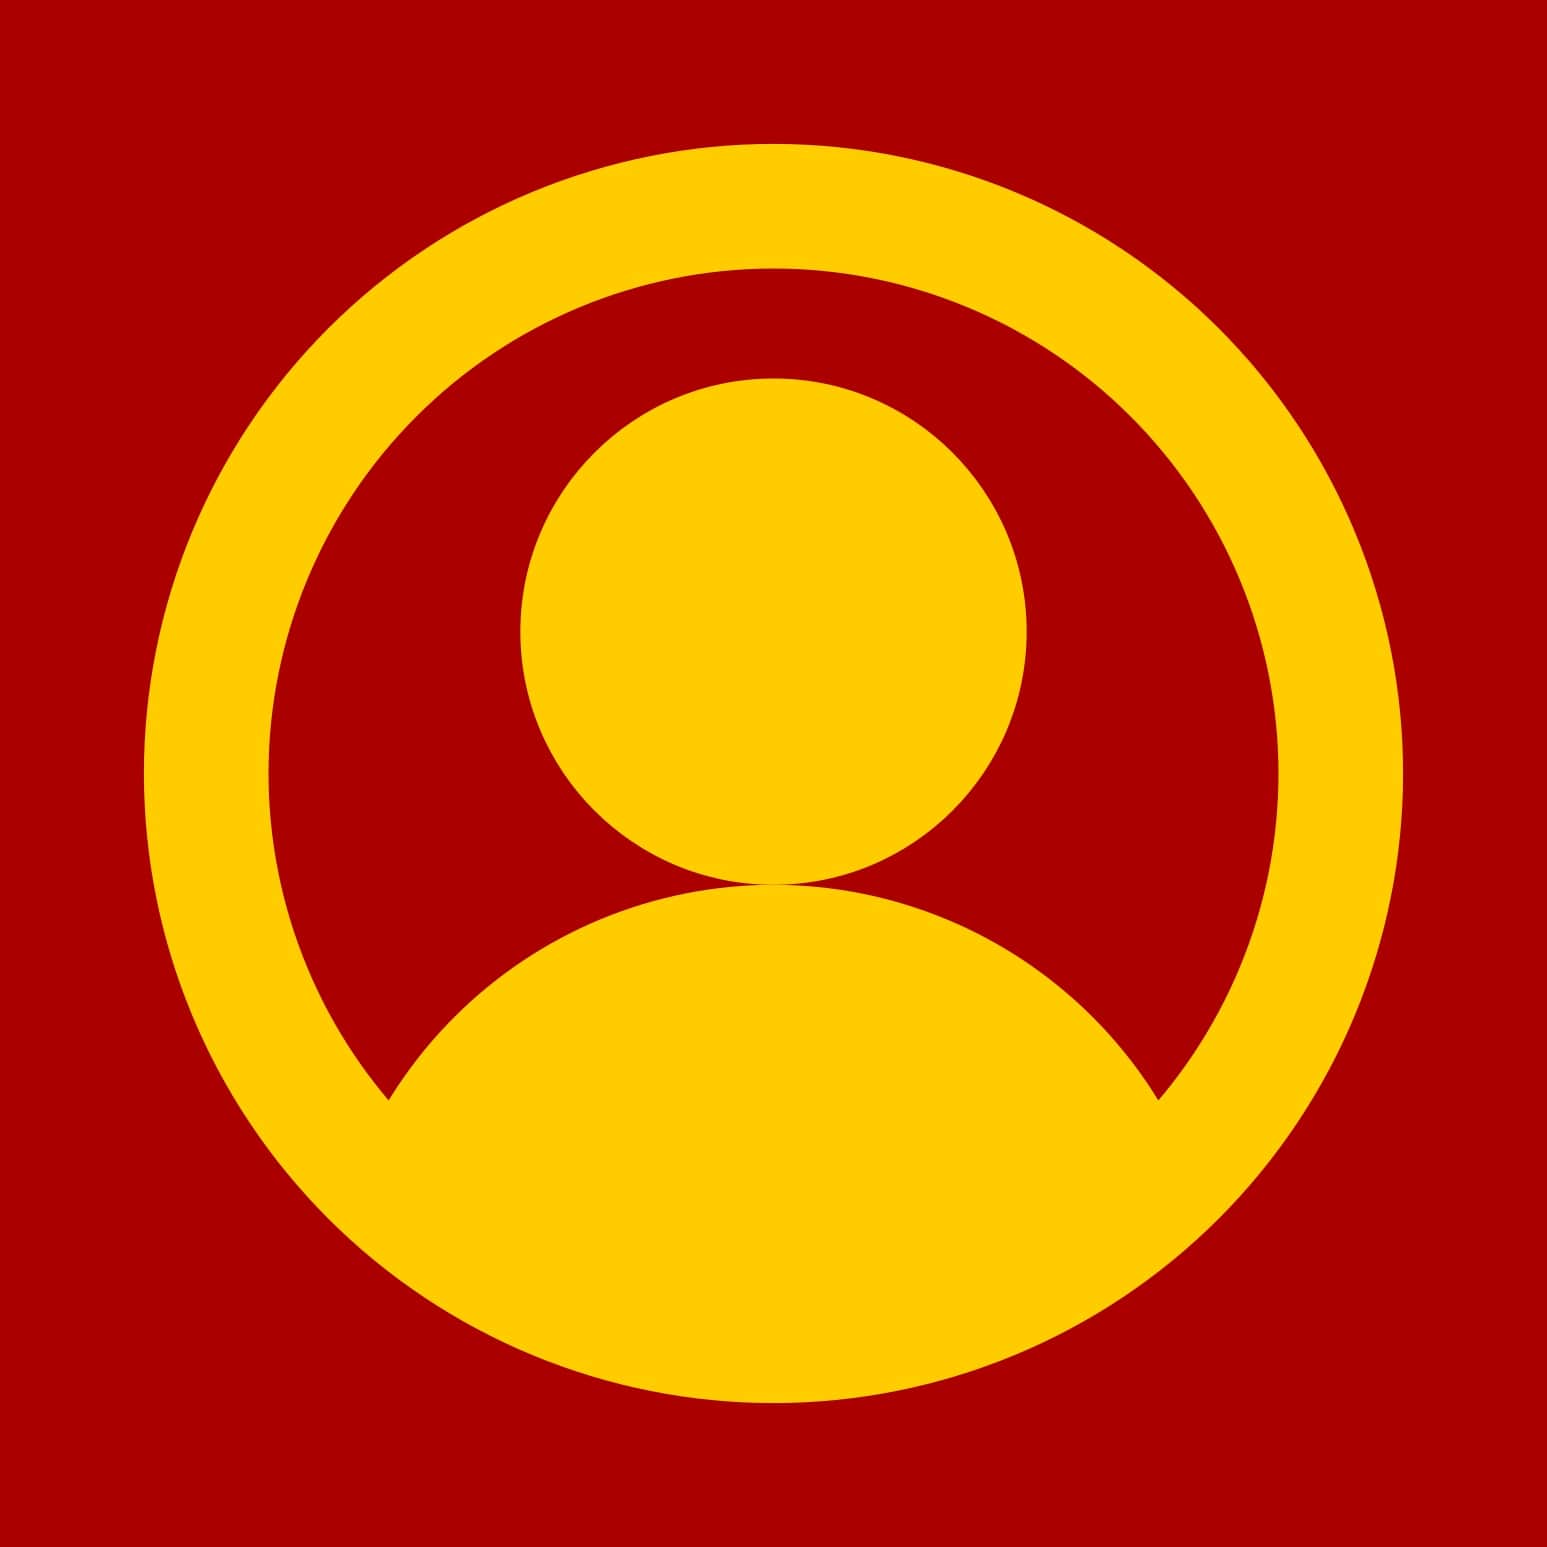 flat color yellow user icon in yellow circle red background